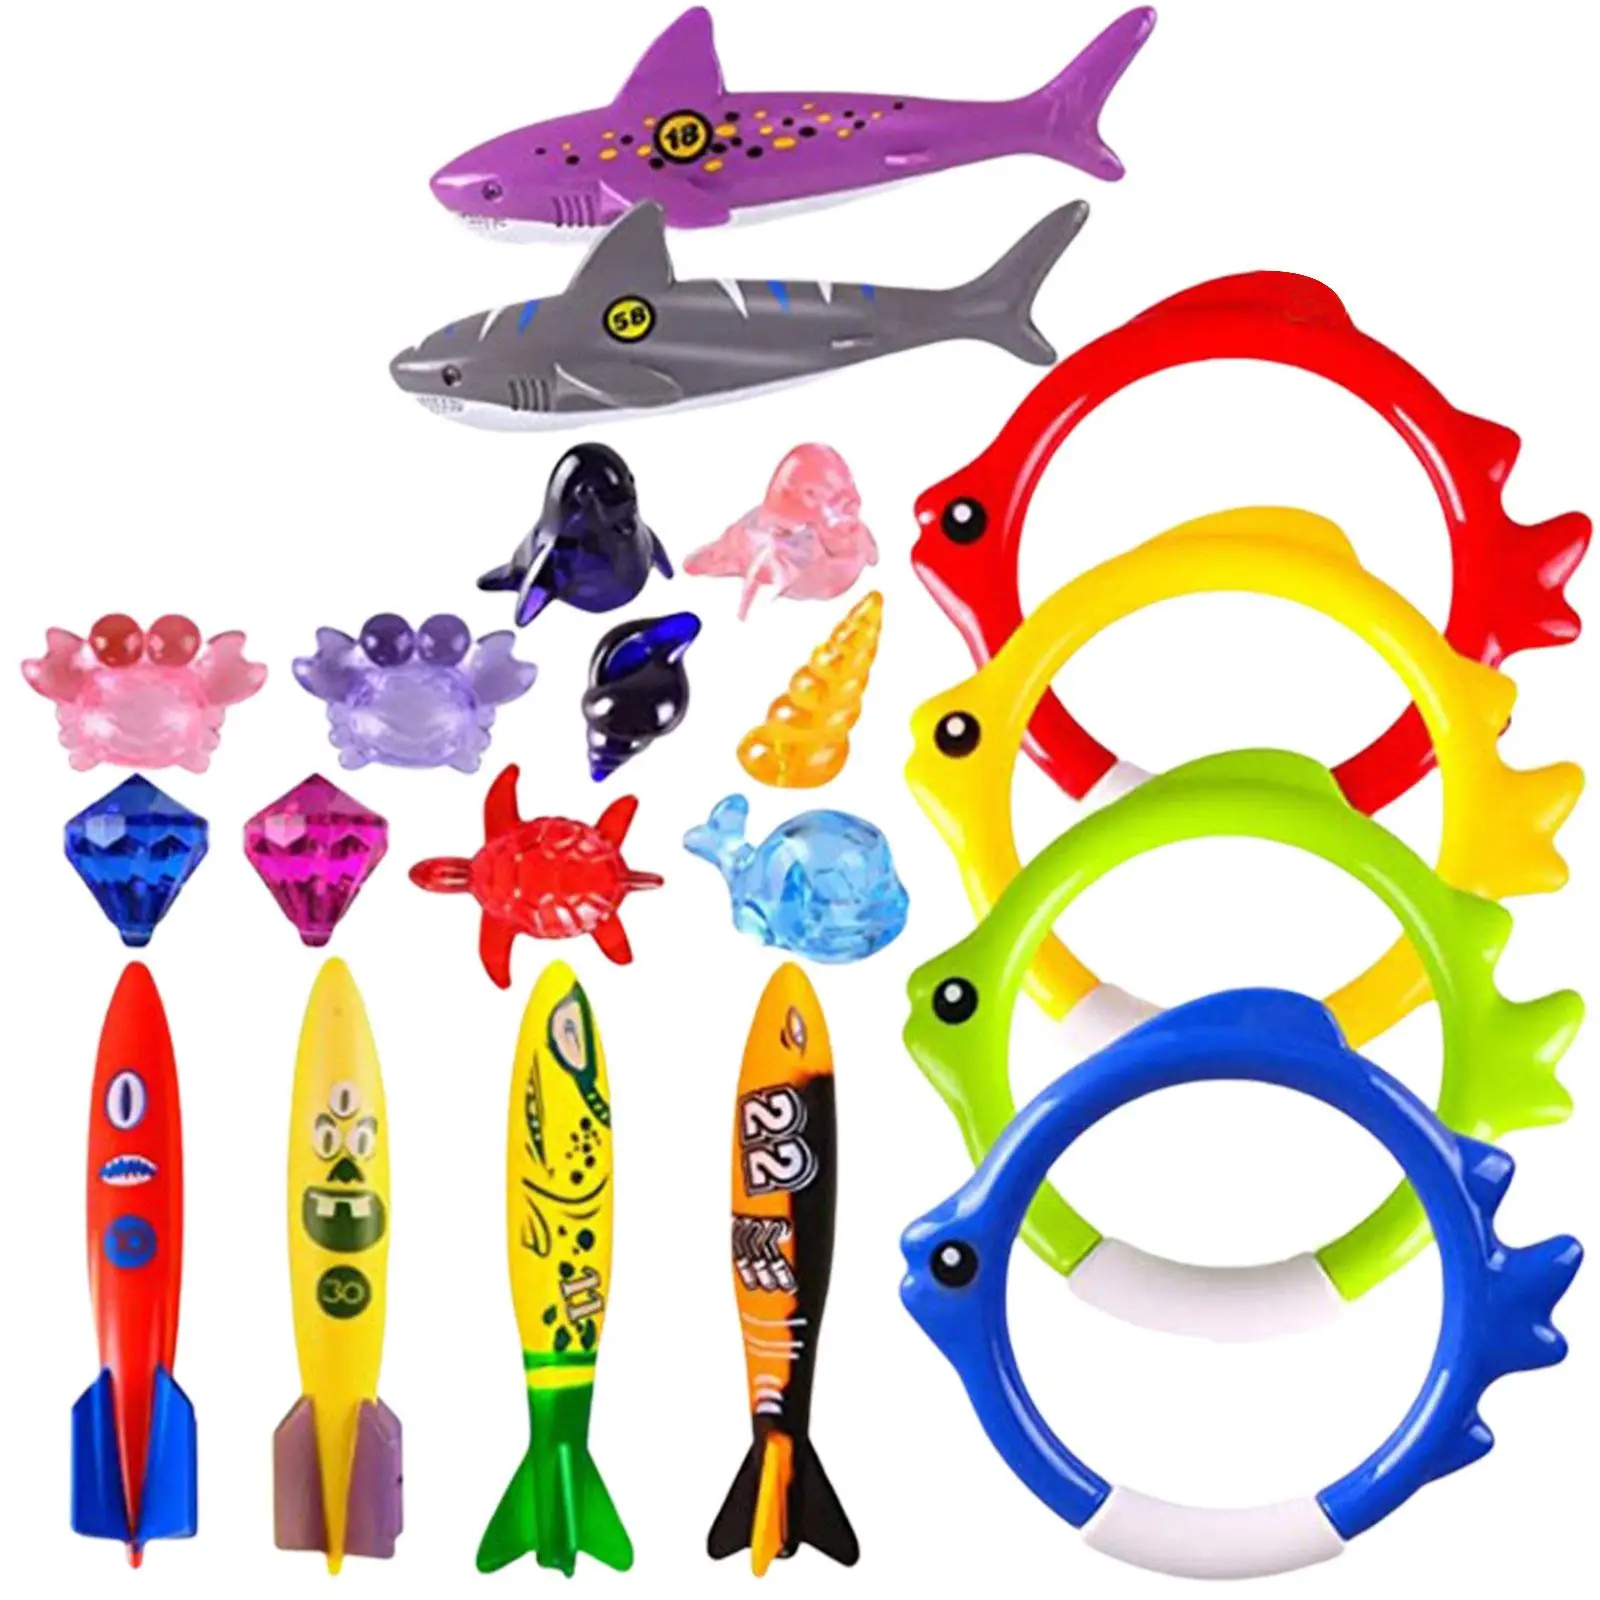 20Pcs Summer Pool Diving Toy Sports Activity Toys Sea Animals Party Favors Toddler Pool Toys for Pool Schools Beach